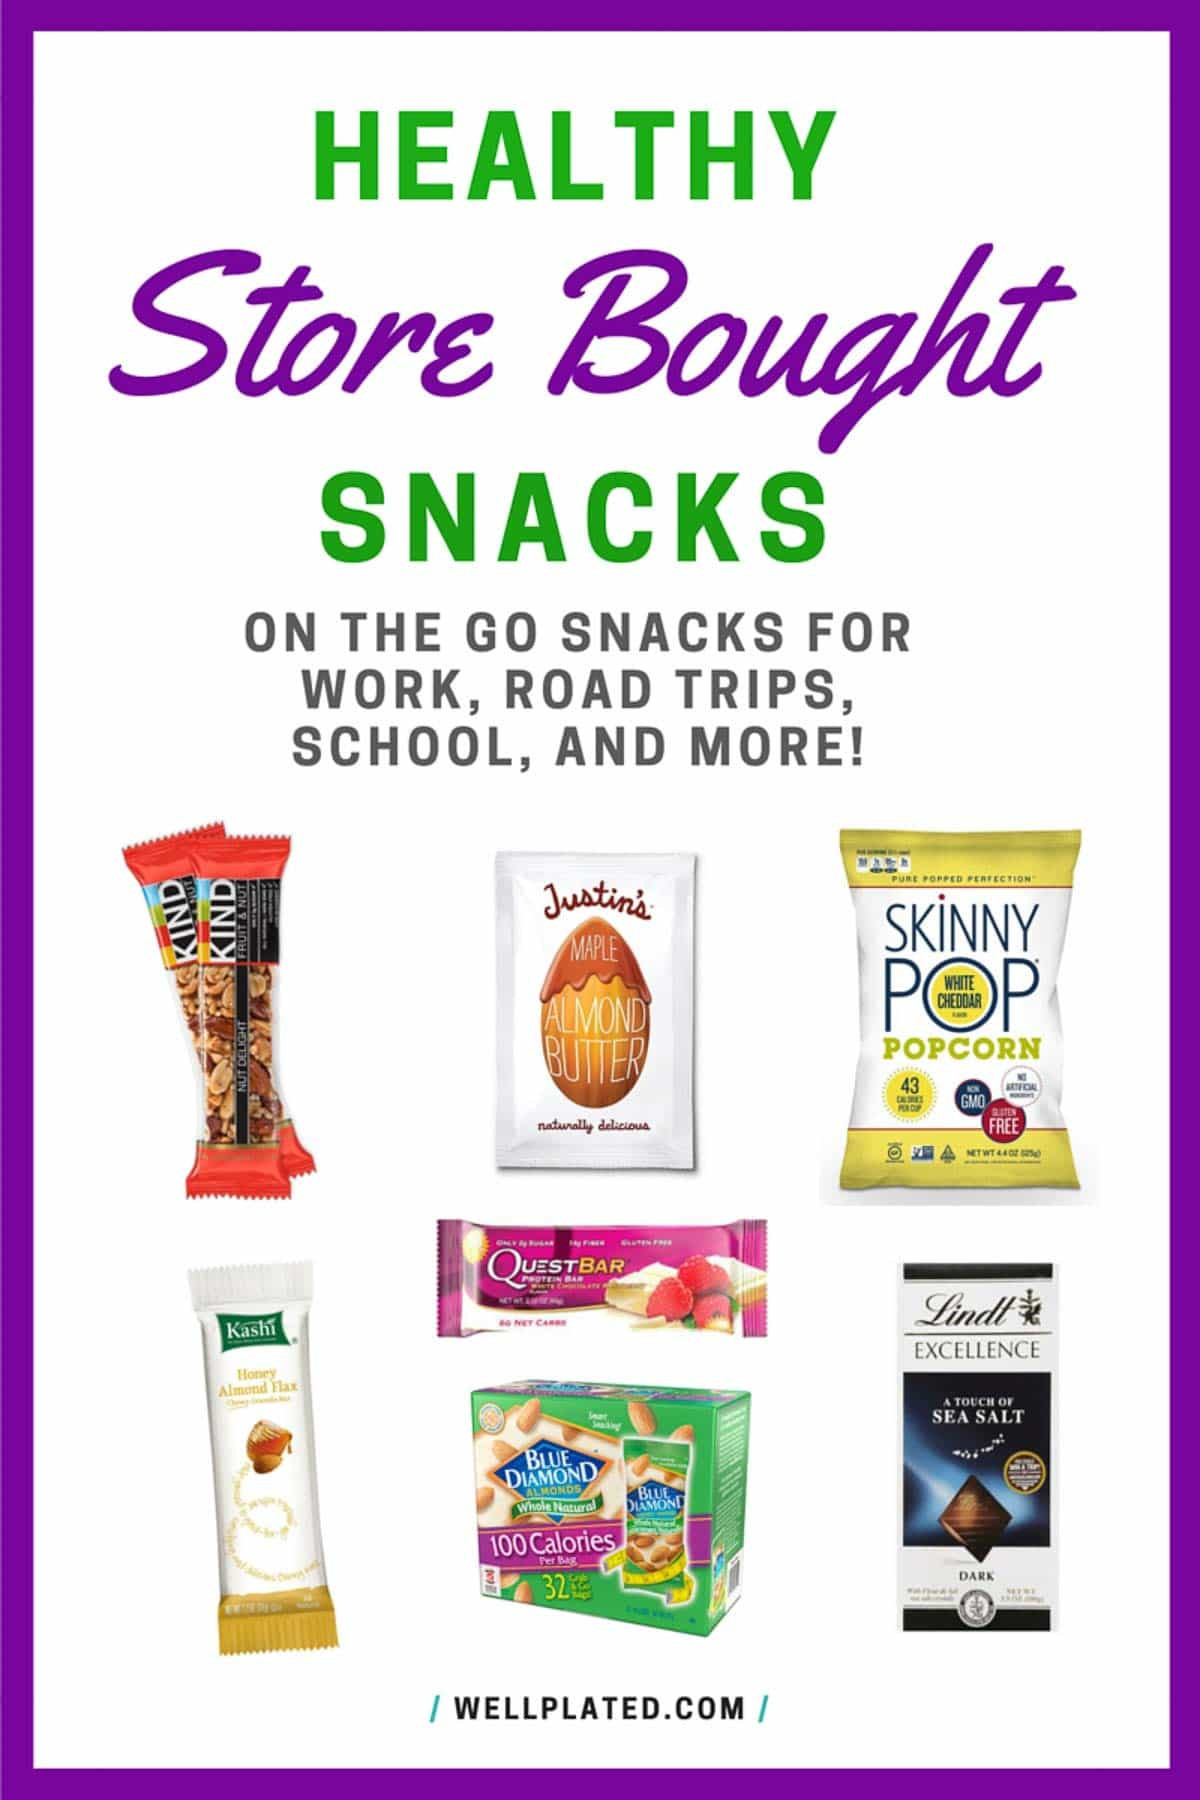 Healthy Store Bought Toddler Snacks
 The Best Healthy Store Bought Snacks